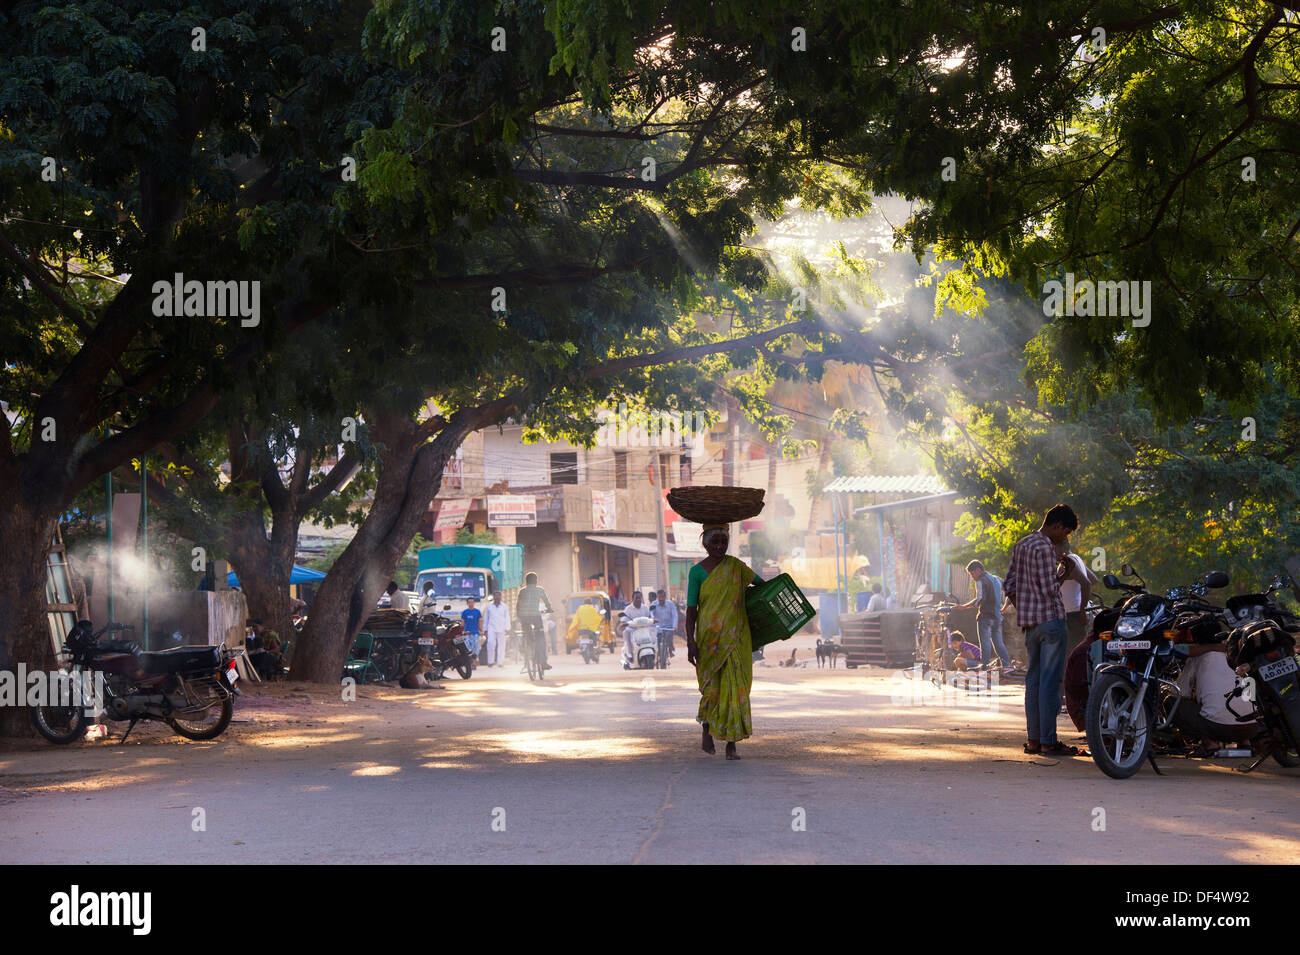 Indian woman carrying a basket on her head through a tunnel of trees. Puttaparthi, Andhra Pradesh, India Stock Photo